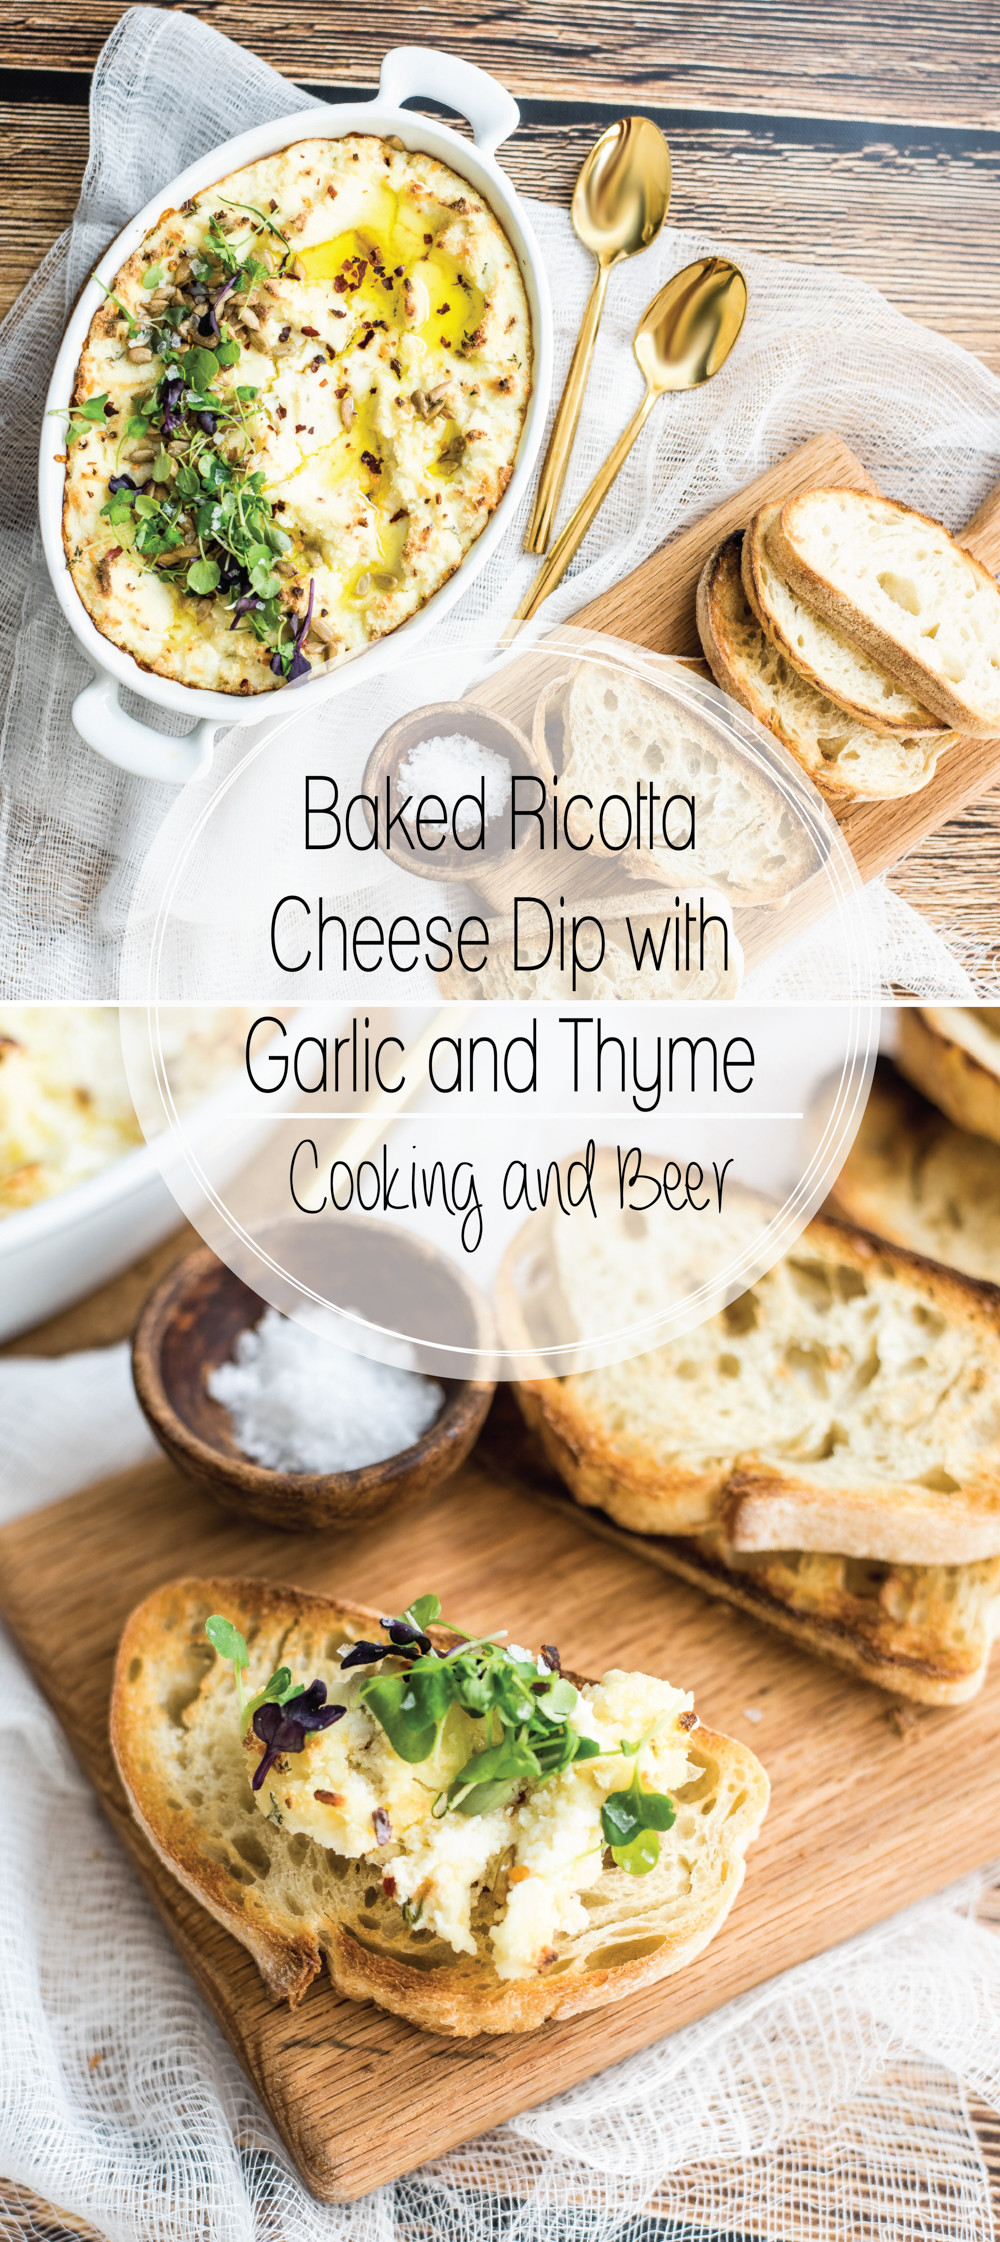 Ricotta Cheese Appetizers
 Baked Ricotta Cheese Dip with Garlic and Thyme Cooking